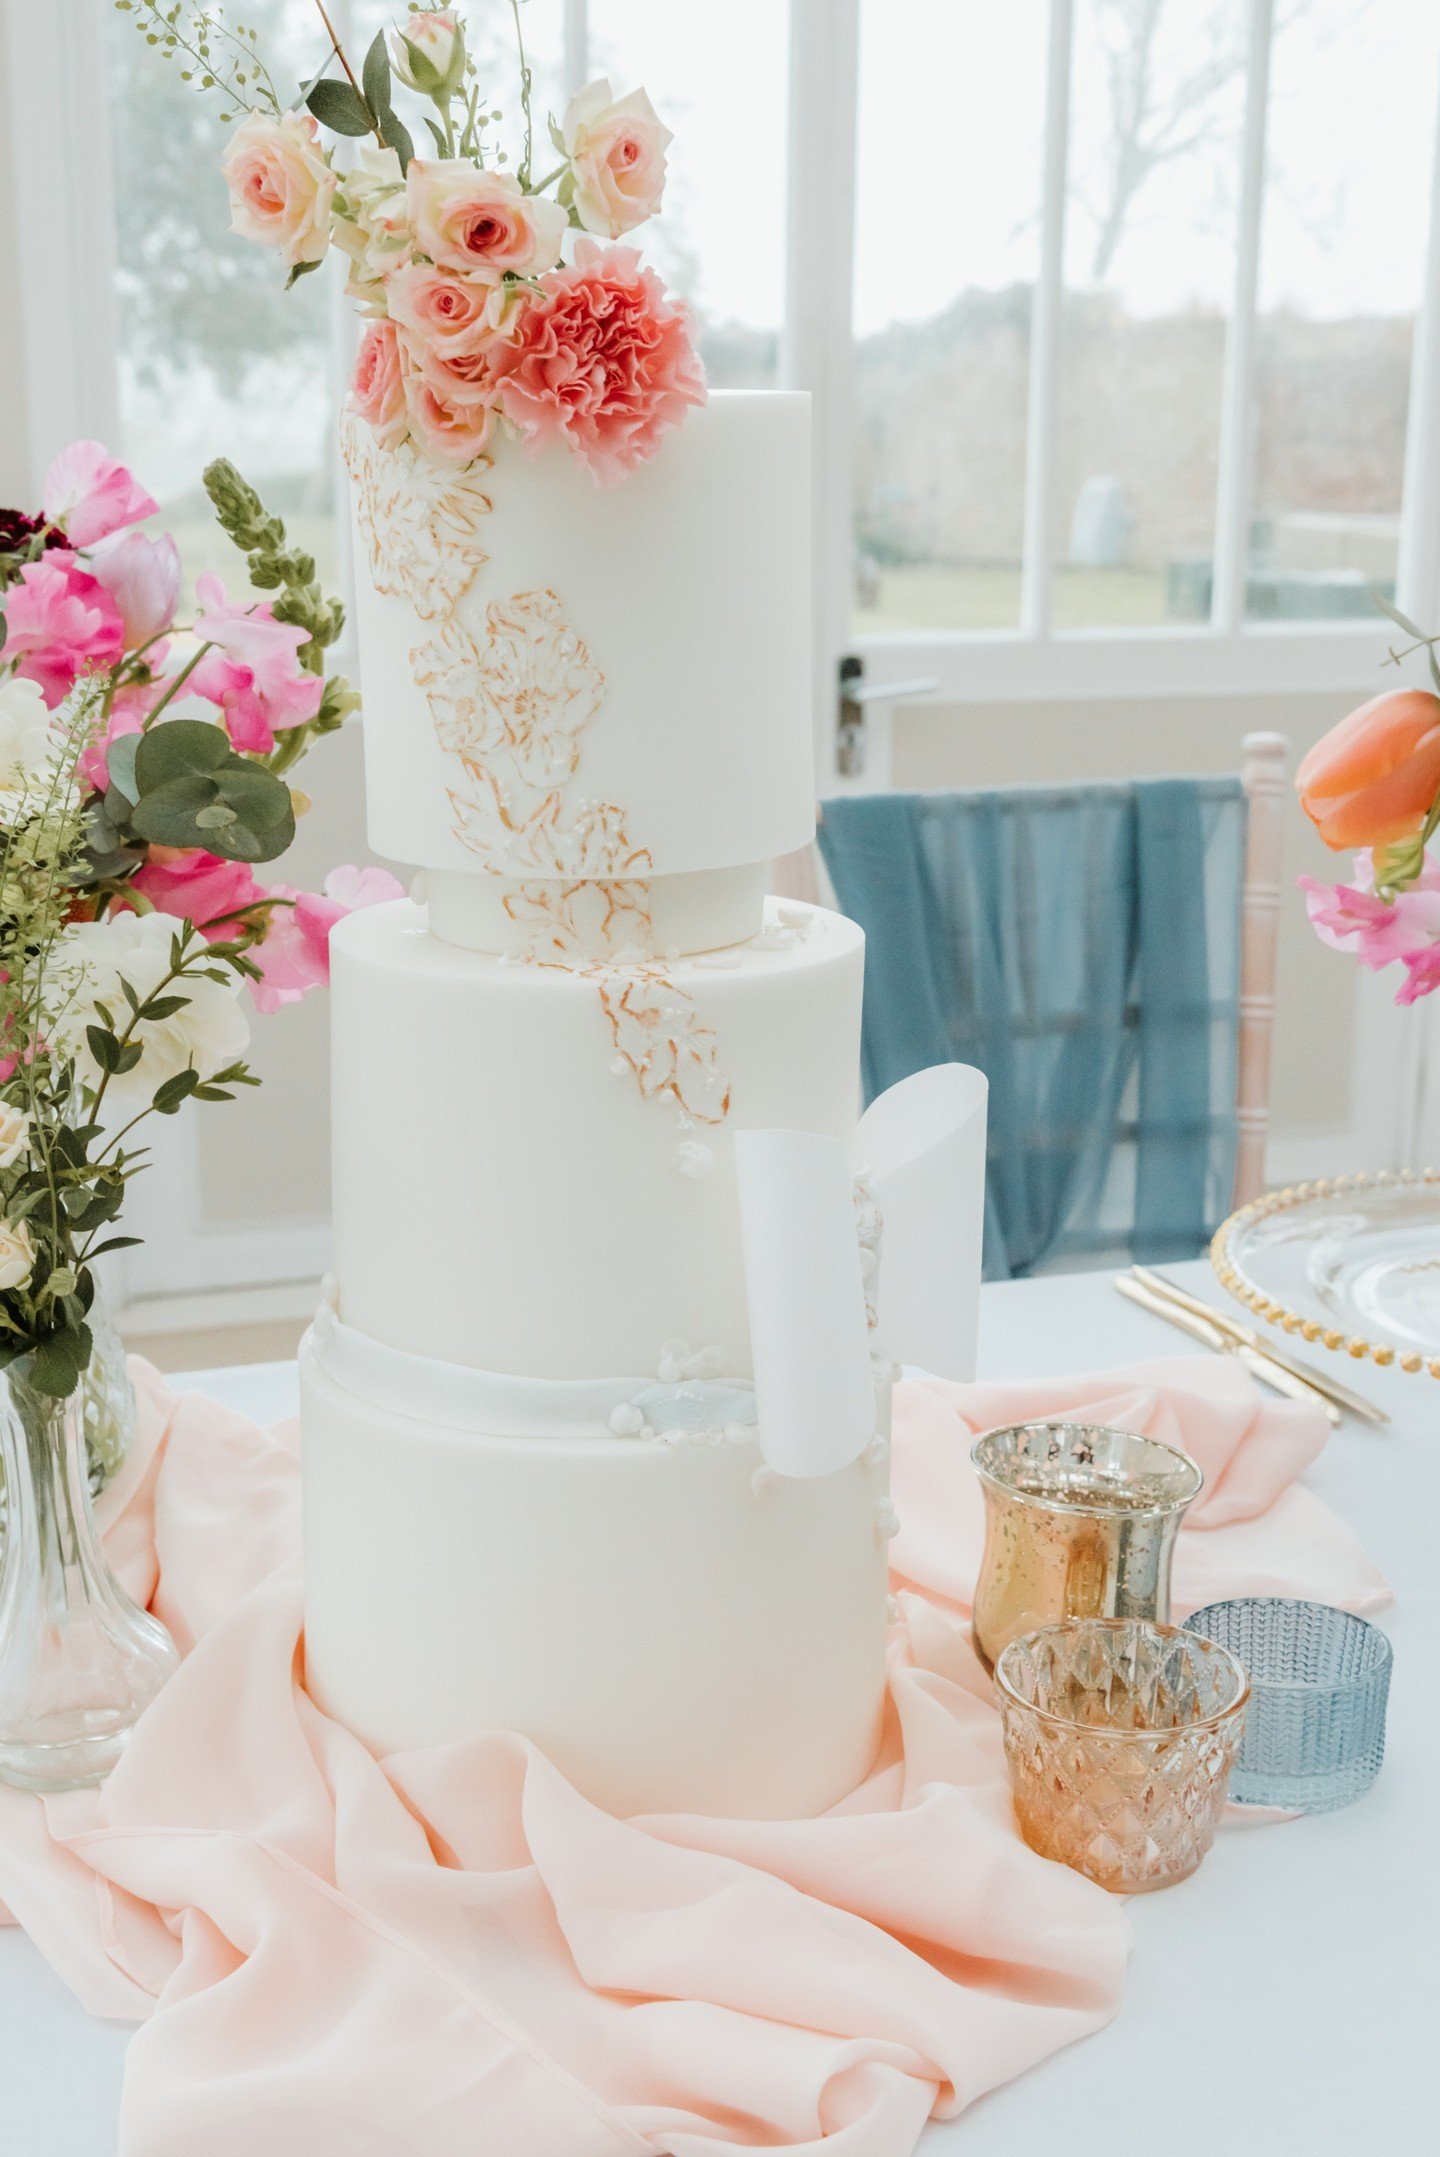 Who says you have to have a cake stand to show your wedding cake off beautifully?
🤍
Don't get me wrong, I do love to see a stunning cake on a stand that compliments the design and style of your wedding aesthetic but there are other options too.
🤍
P